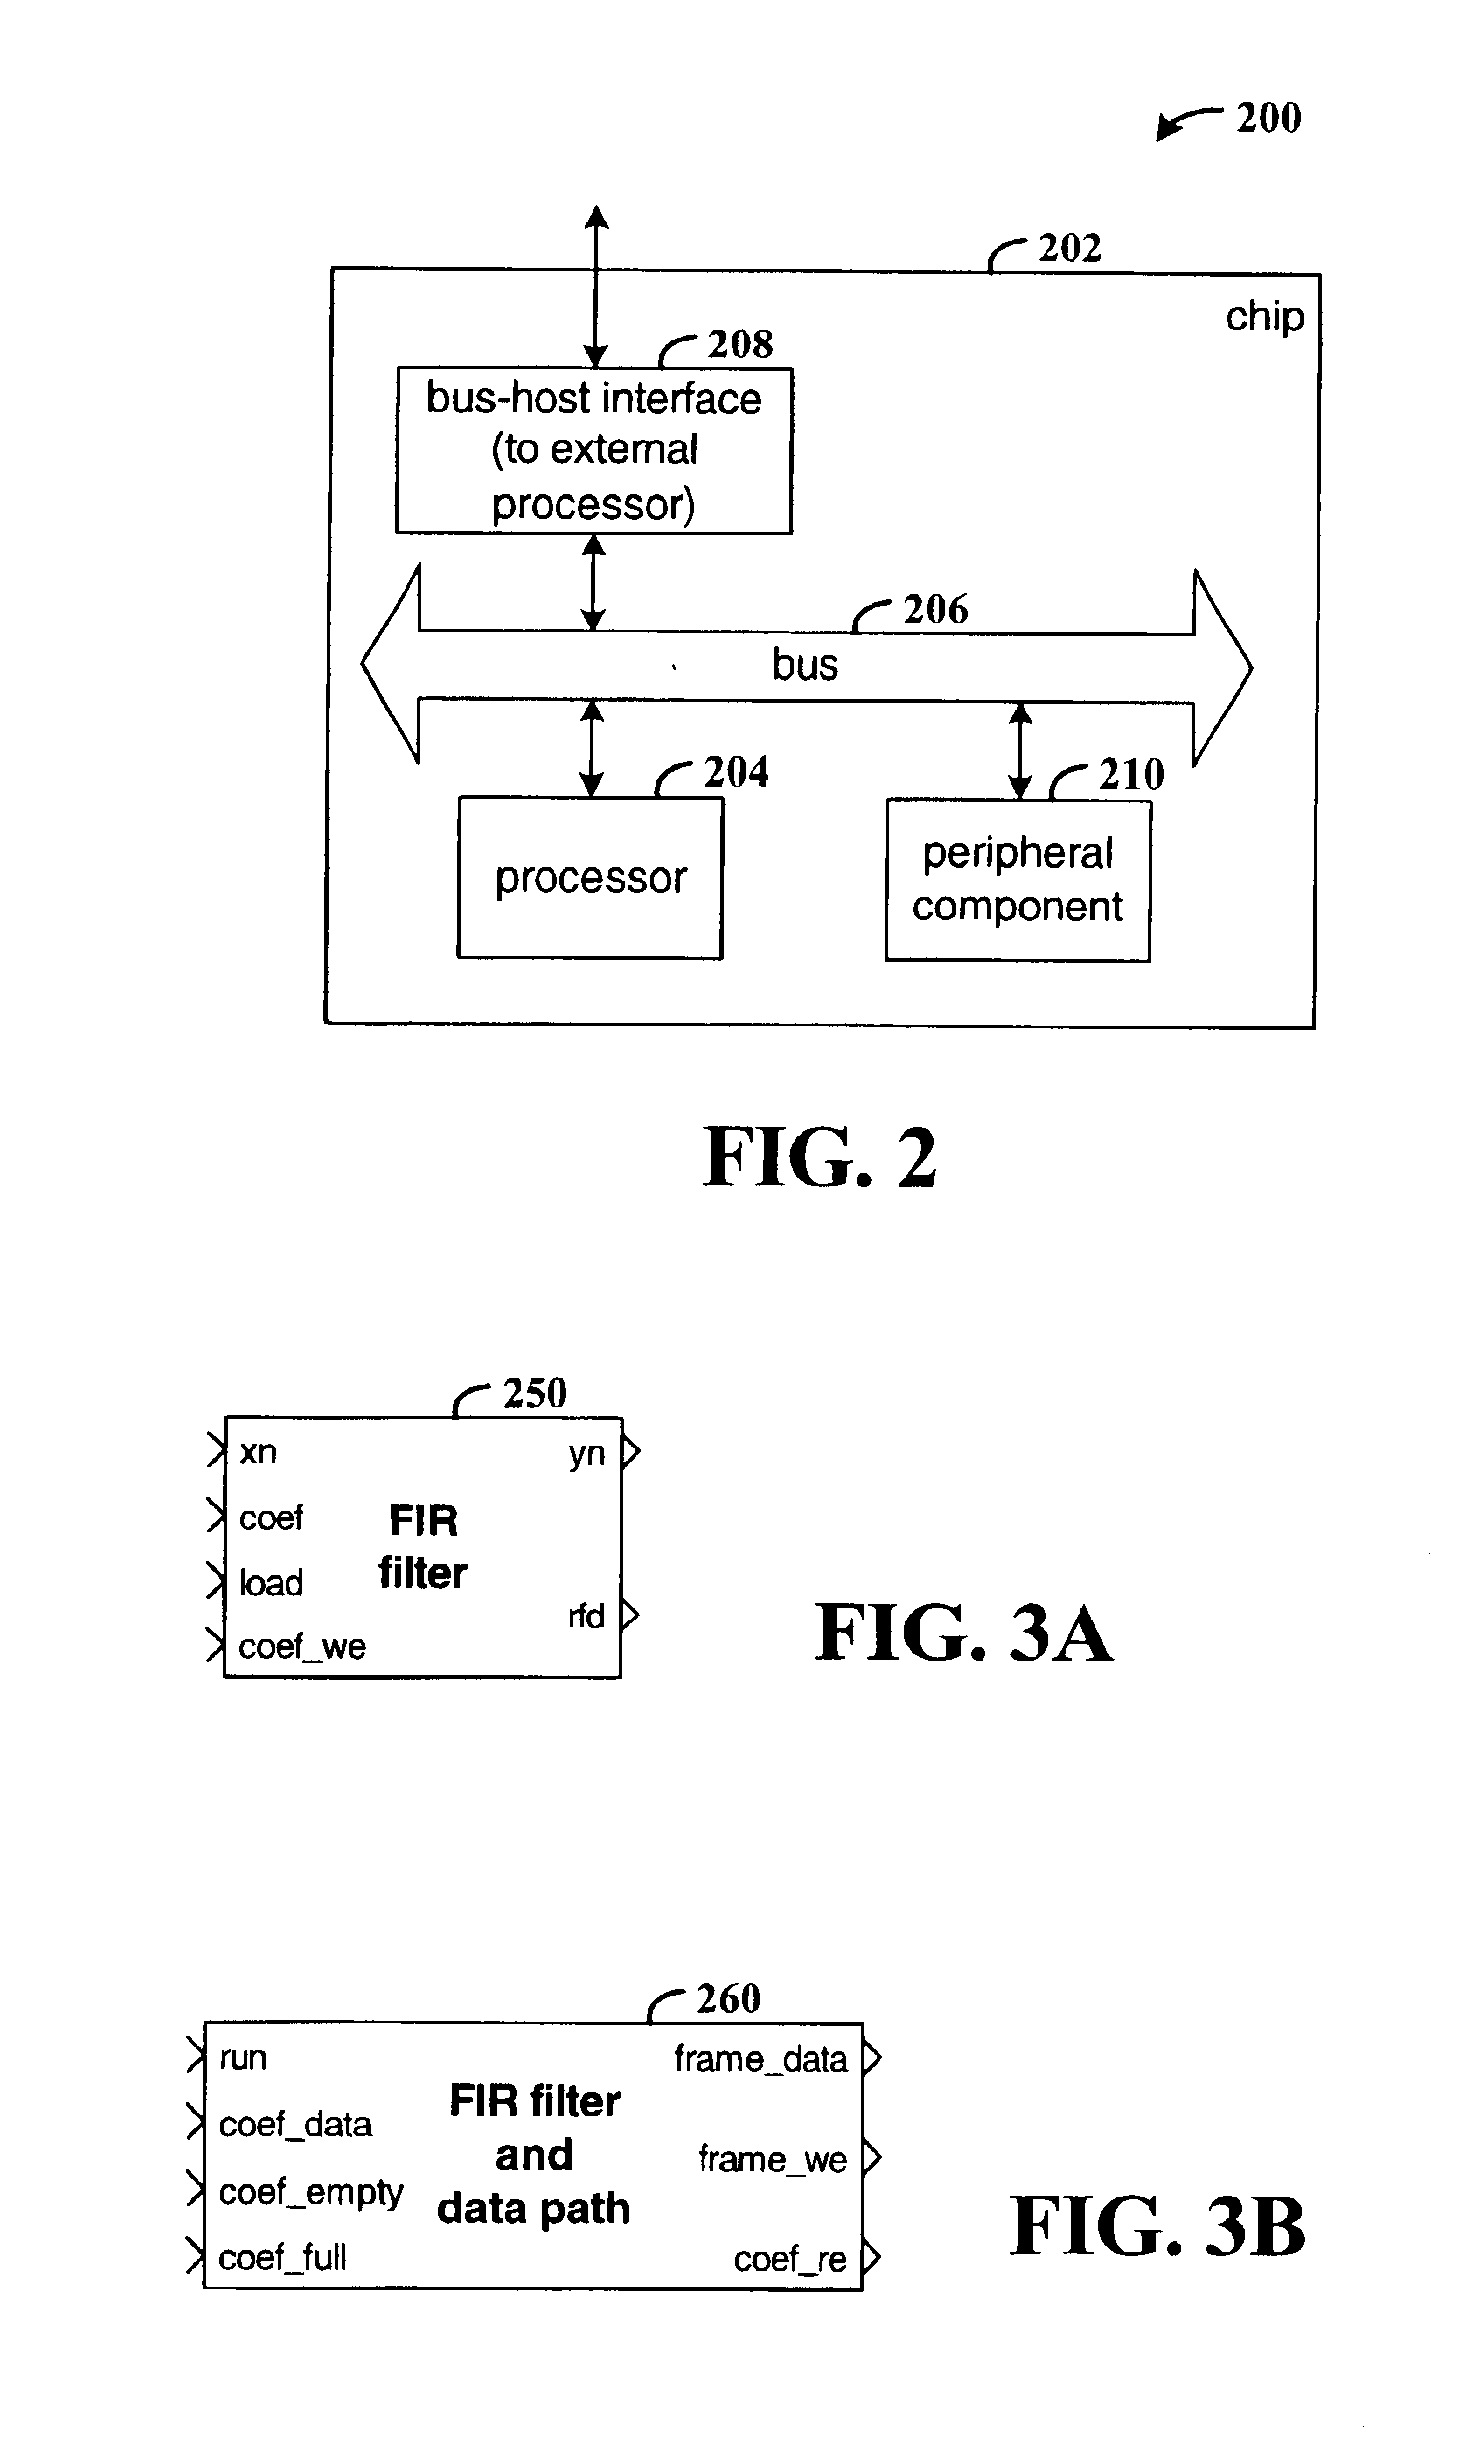 Method and system for generating a circuit design including a peripheral component connected to a bus